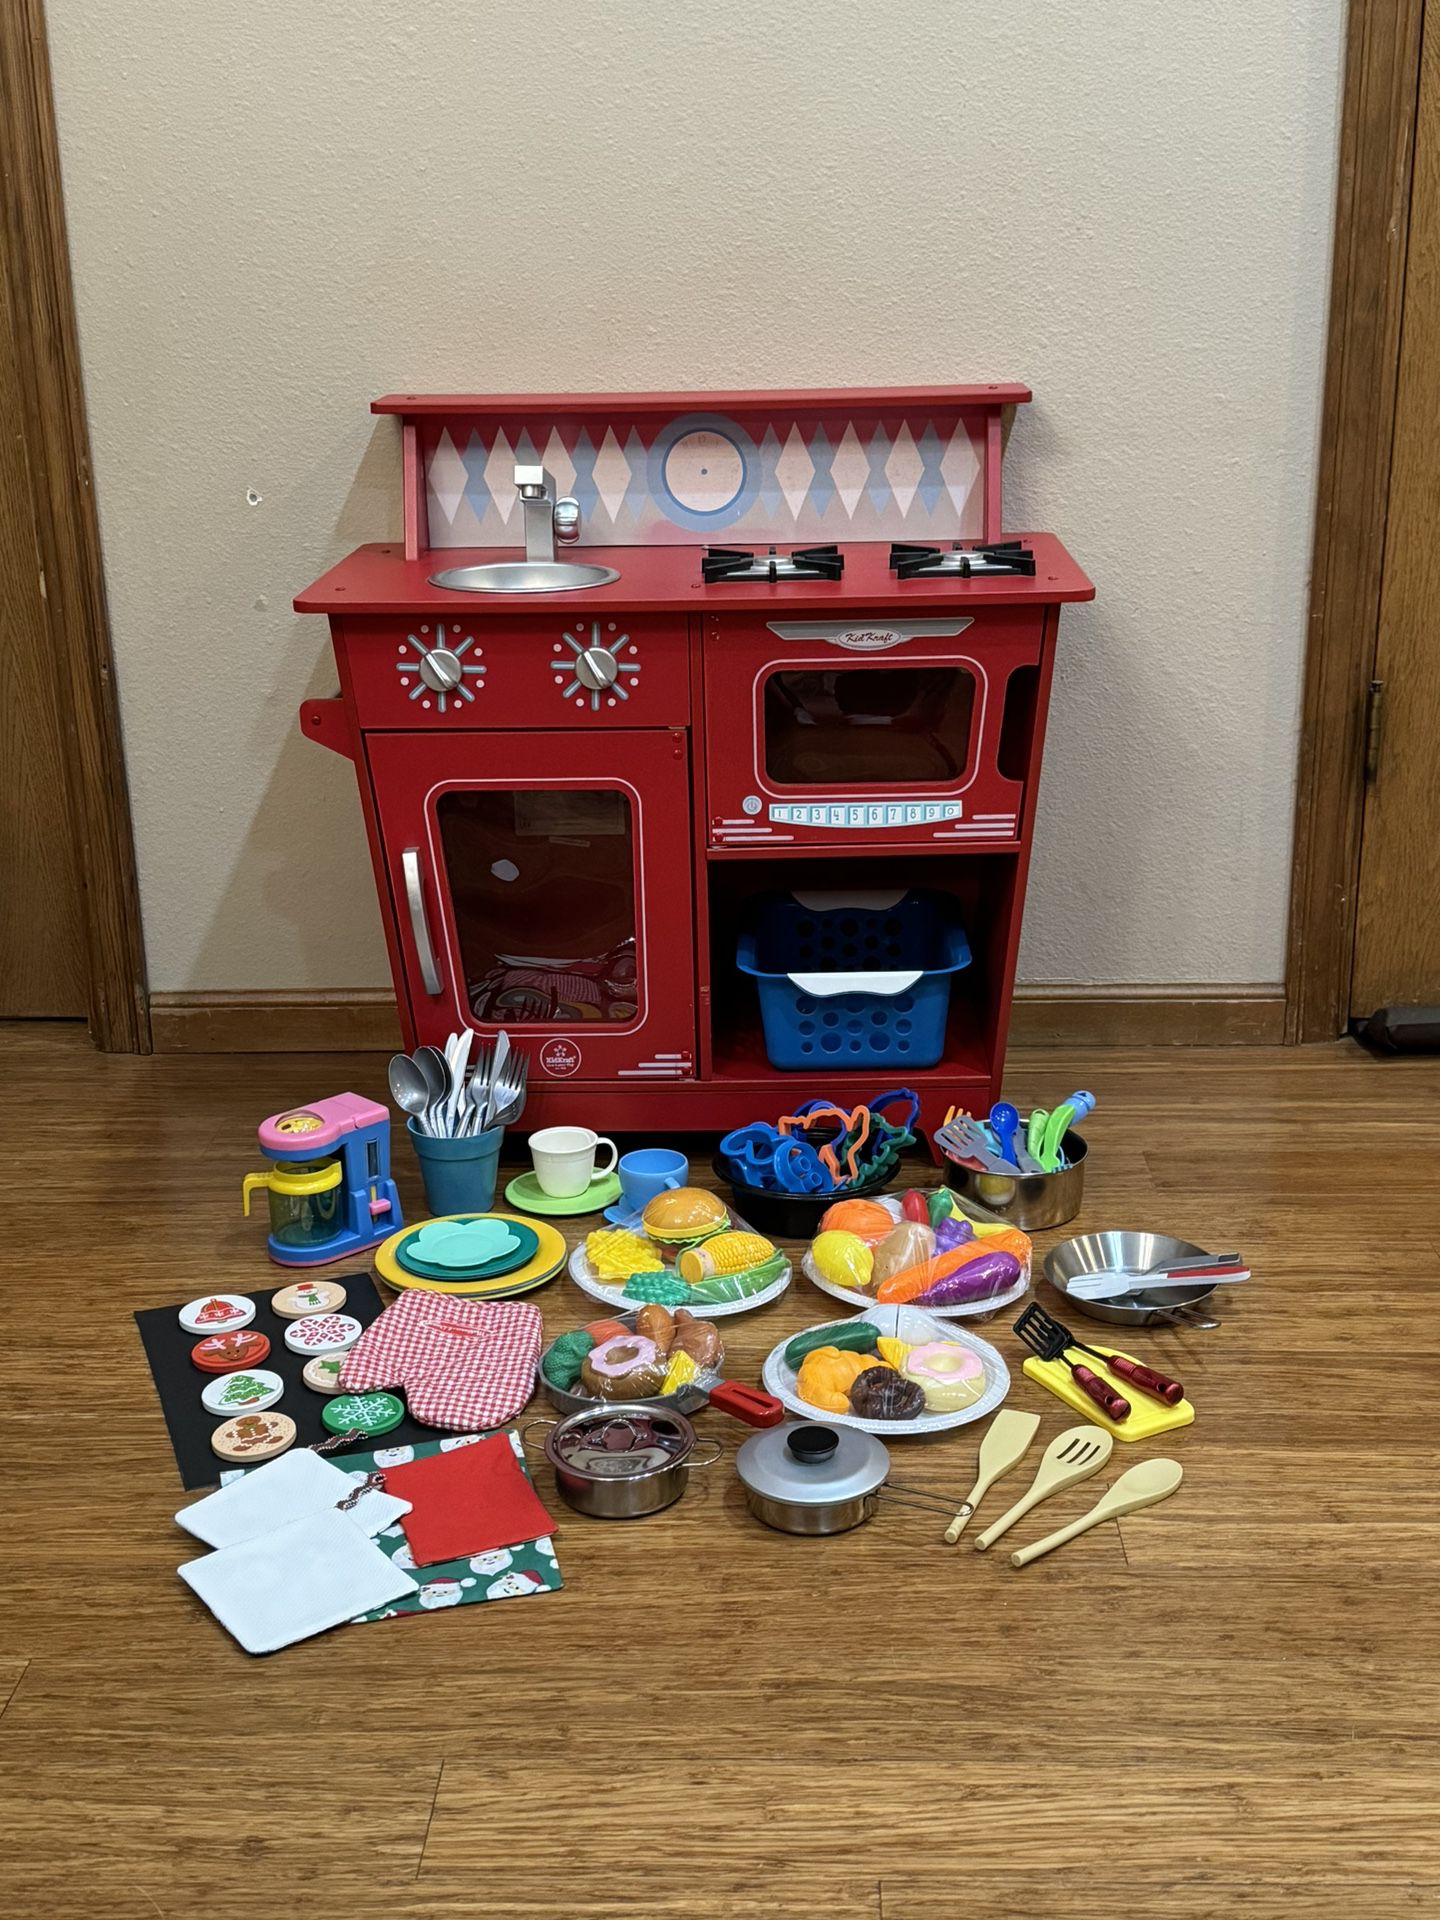 KidKraft Classic Kids Play Kitchen - Includes All Accessories 